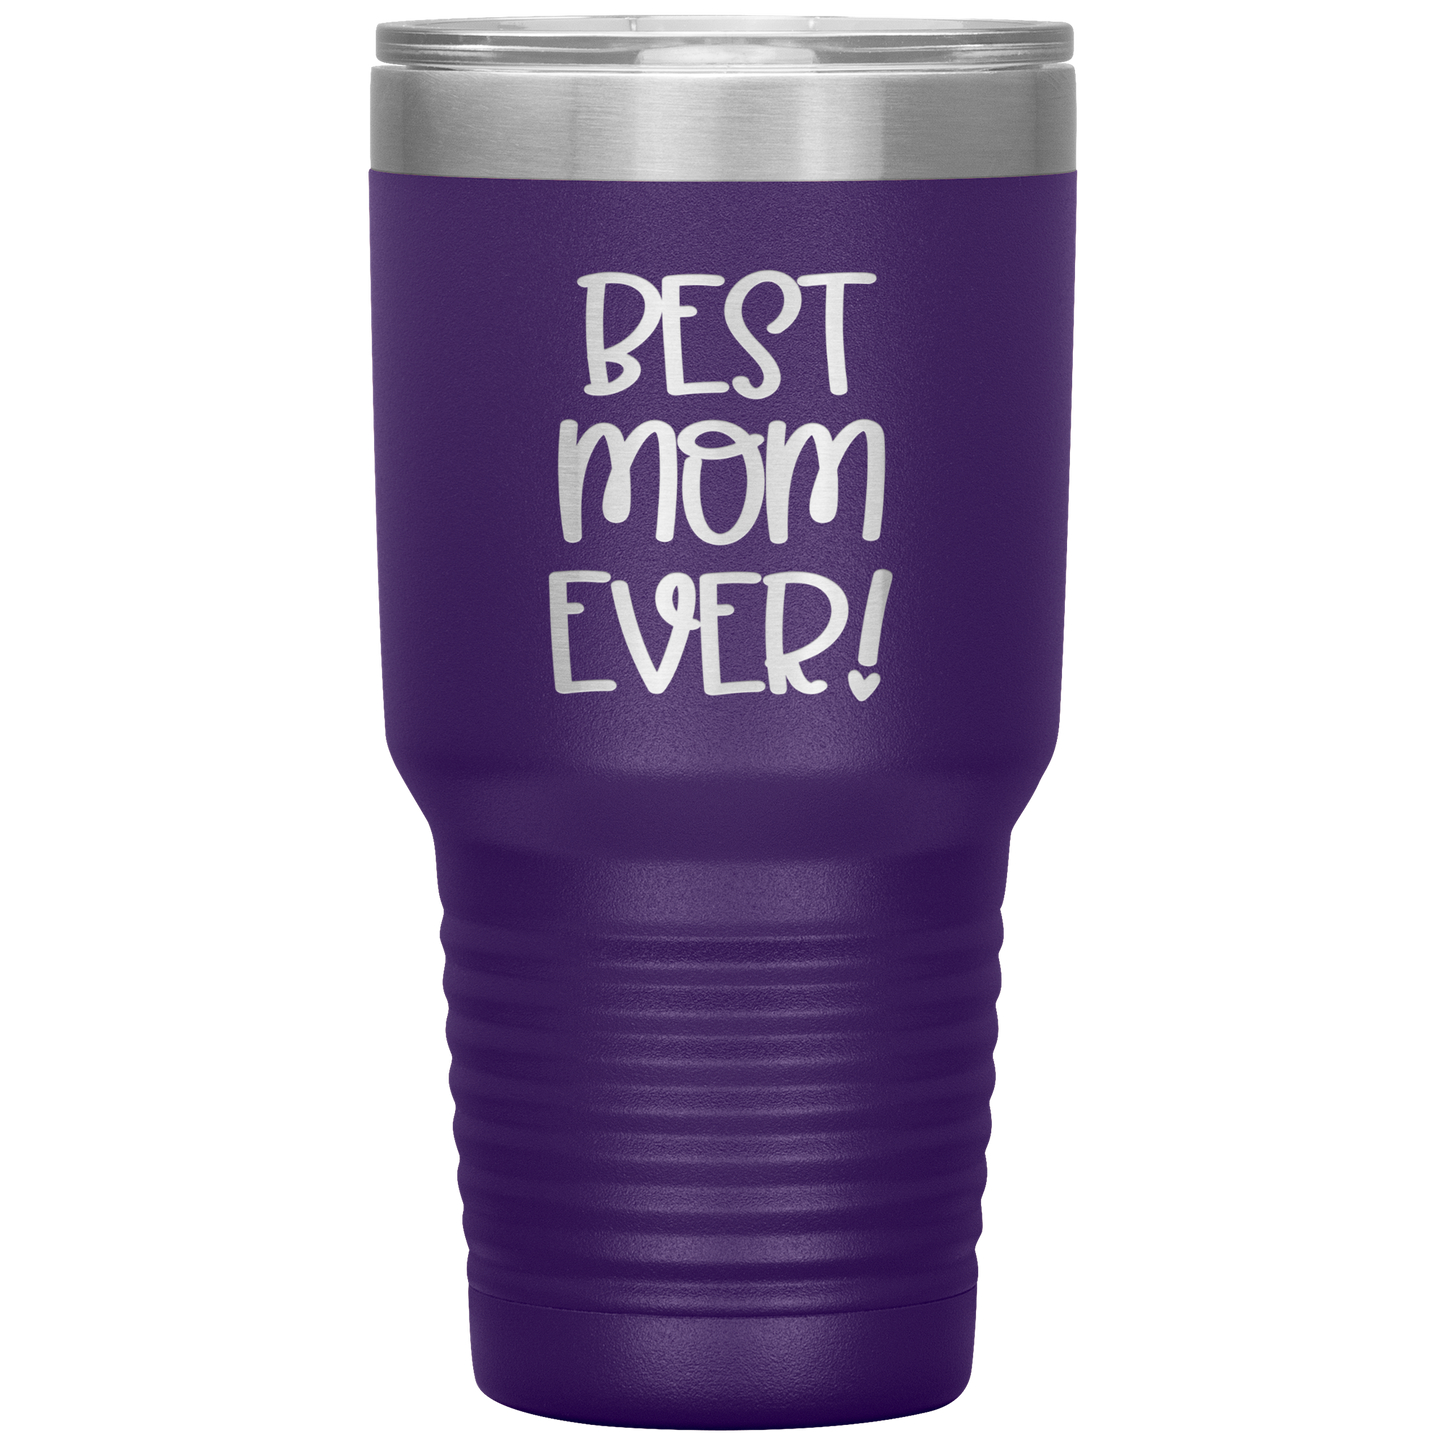 "Best Mom Ever!" 30 oz. Insulated Stainless Steel Insulated Travel Coffee Cup with Lid